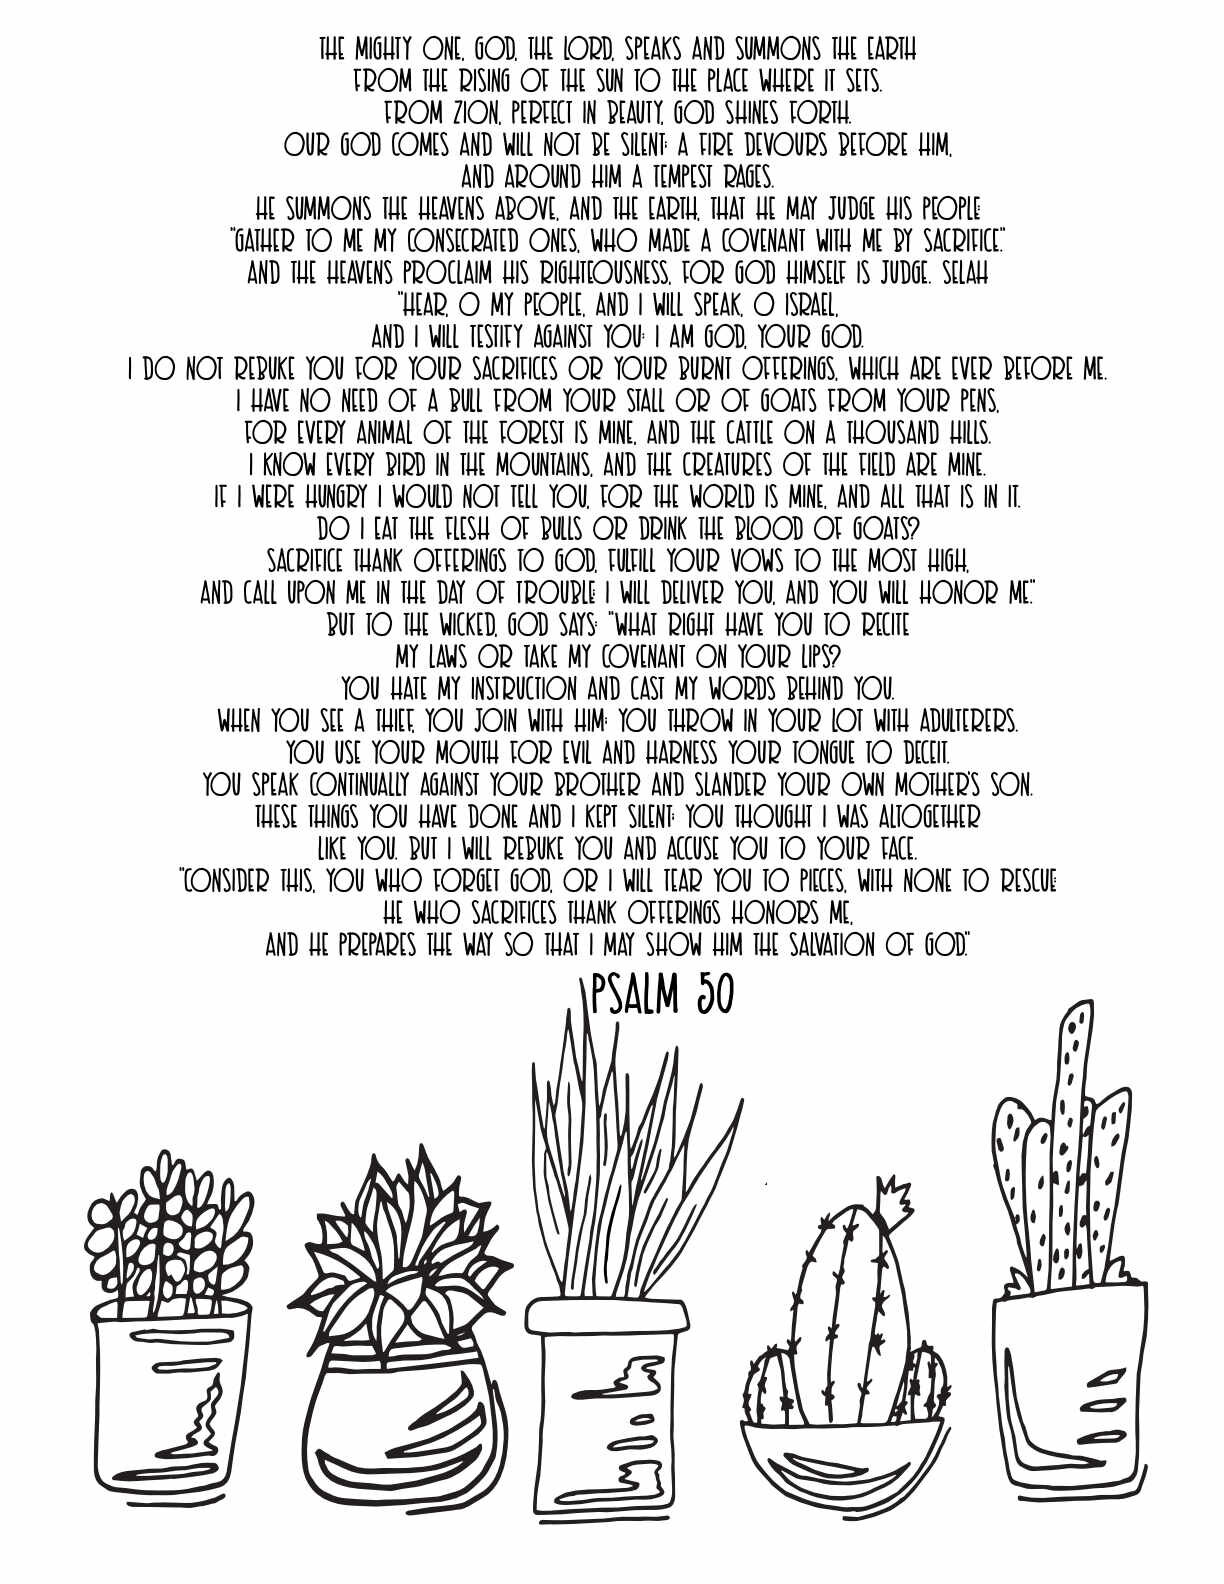 10 Free Printable Psalm Coloring Pages - Download and Color Adult Scripture - Psalm 50CLICK HERE TO DOWNLOAD THIS PAGE FREE